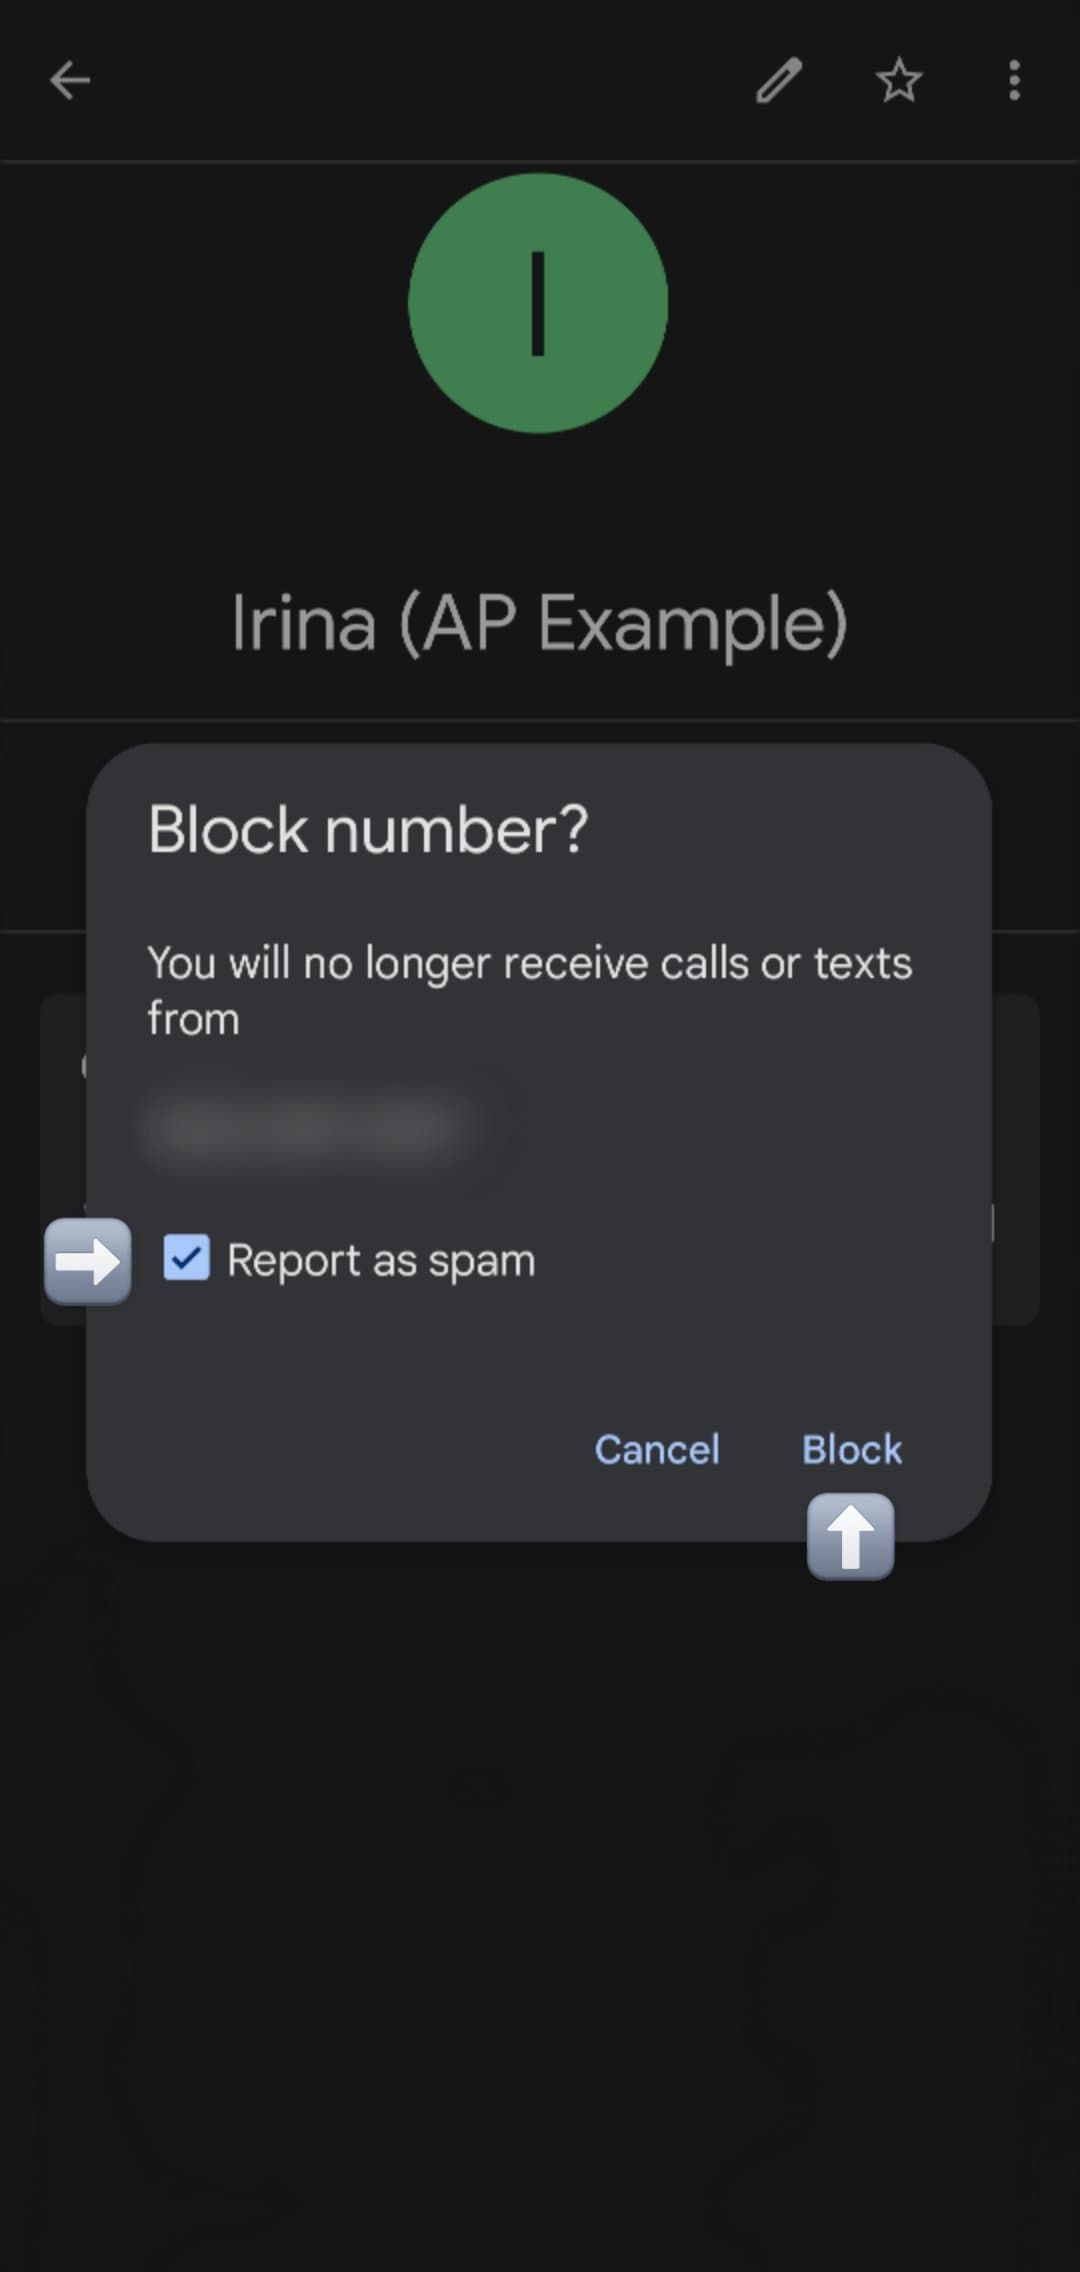 Image shows the block number pop up with arrows pointing to the 'Report as spam' button and 'Block' button.